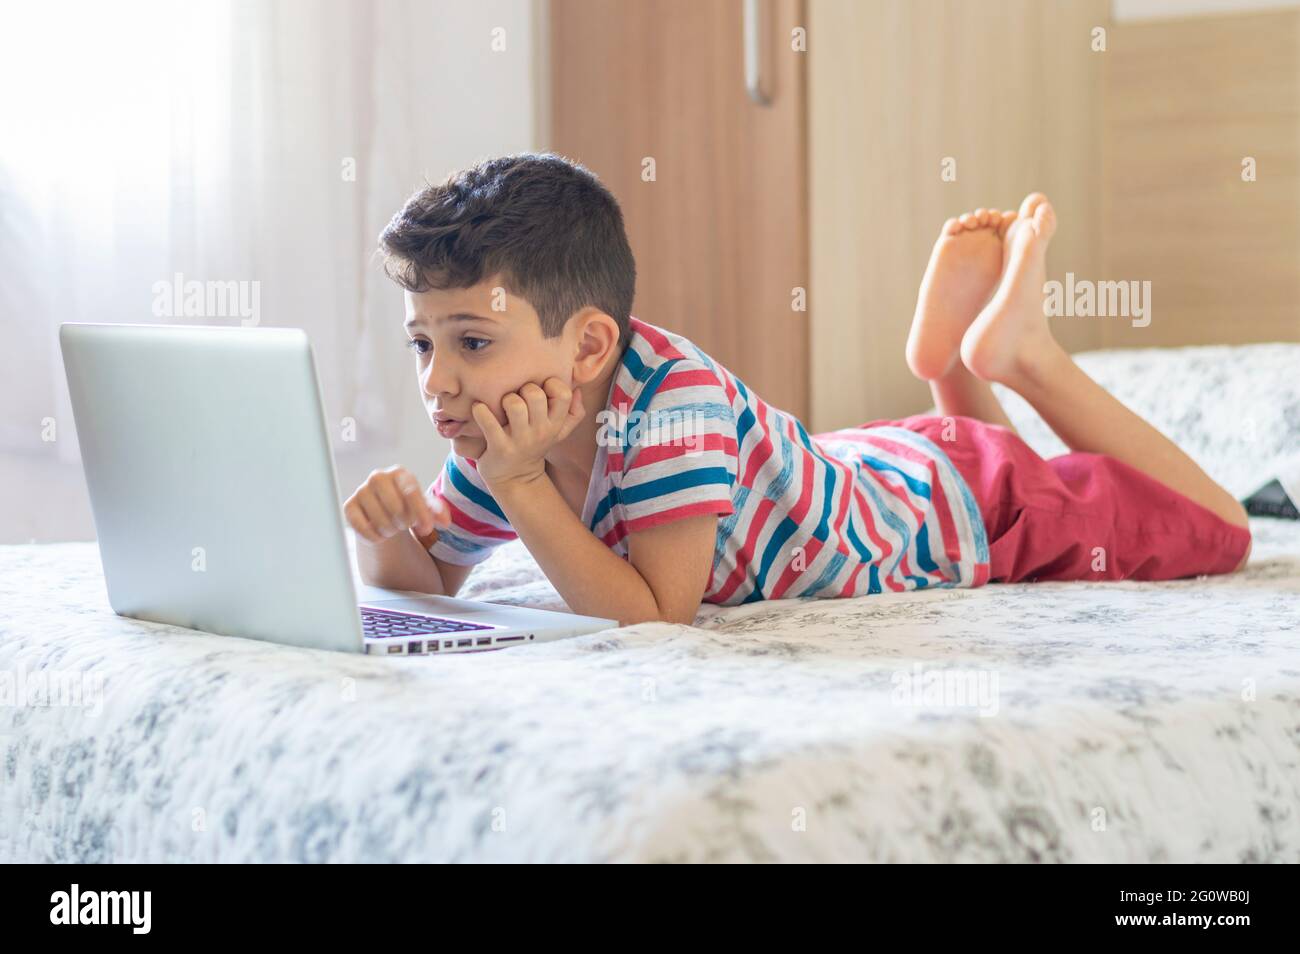 Young boy child lying on bed using a laptop. Online class lesson Stock Photo